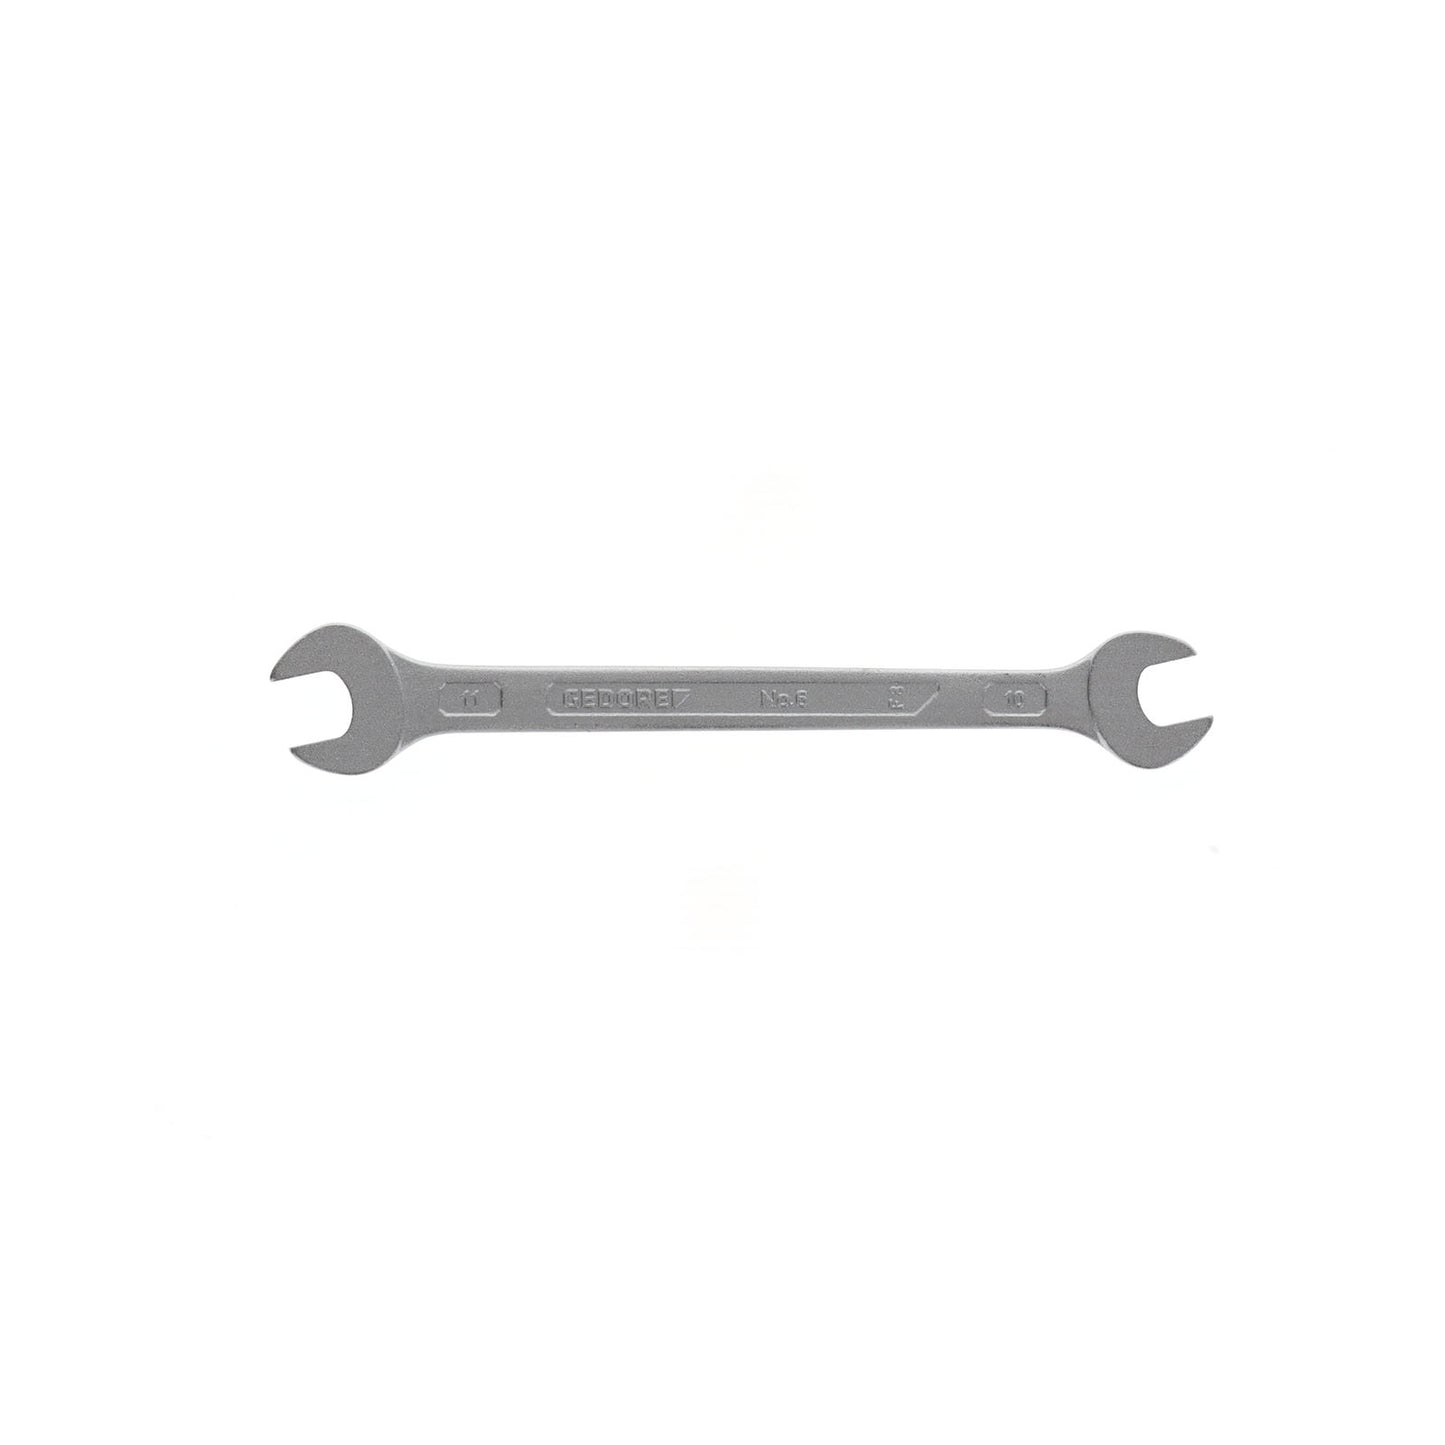 GEDORE 6 10X11 - 2-Mount Fixed Wrench, 10x11 (6064720)